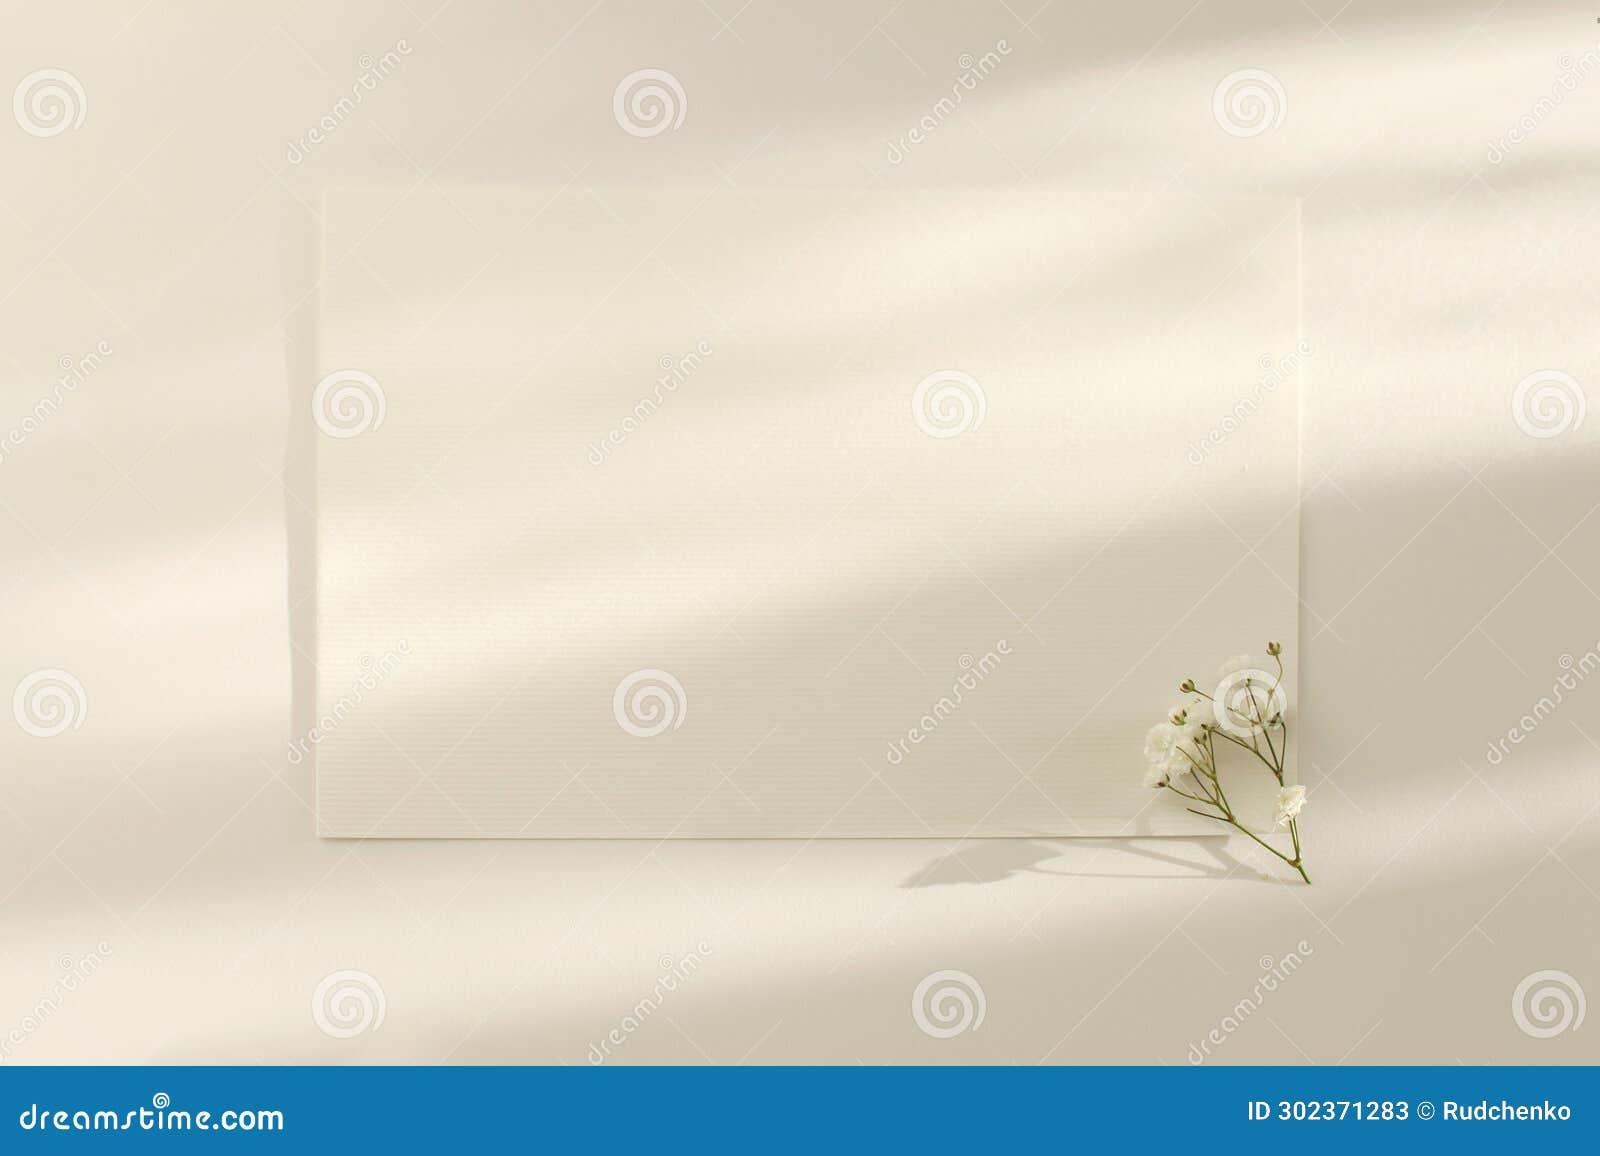 empty blank texture canvas paper card with copy space for your text message and gypsophila flower. light and shadows minimalism